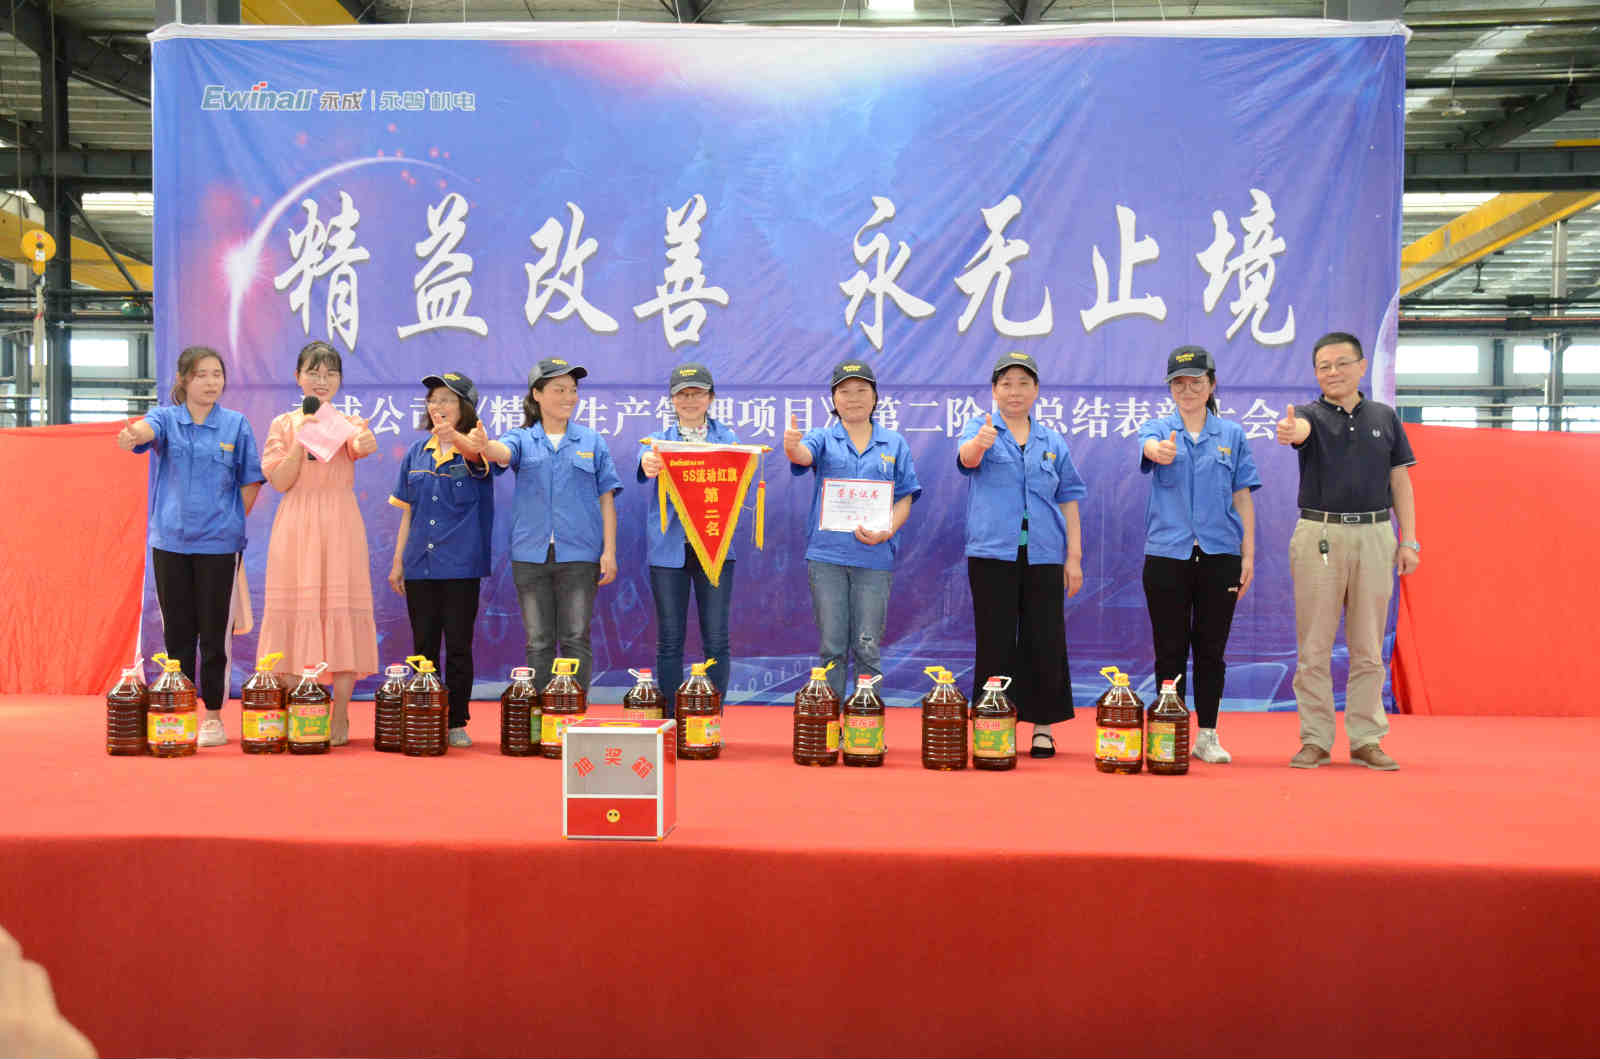 The second stage summary and commendation conference of "Lean Production Management Project" of Yongcheng Company ended successfully